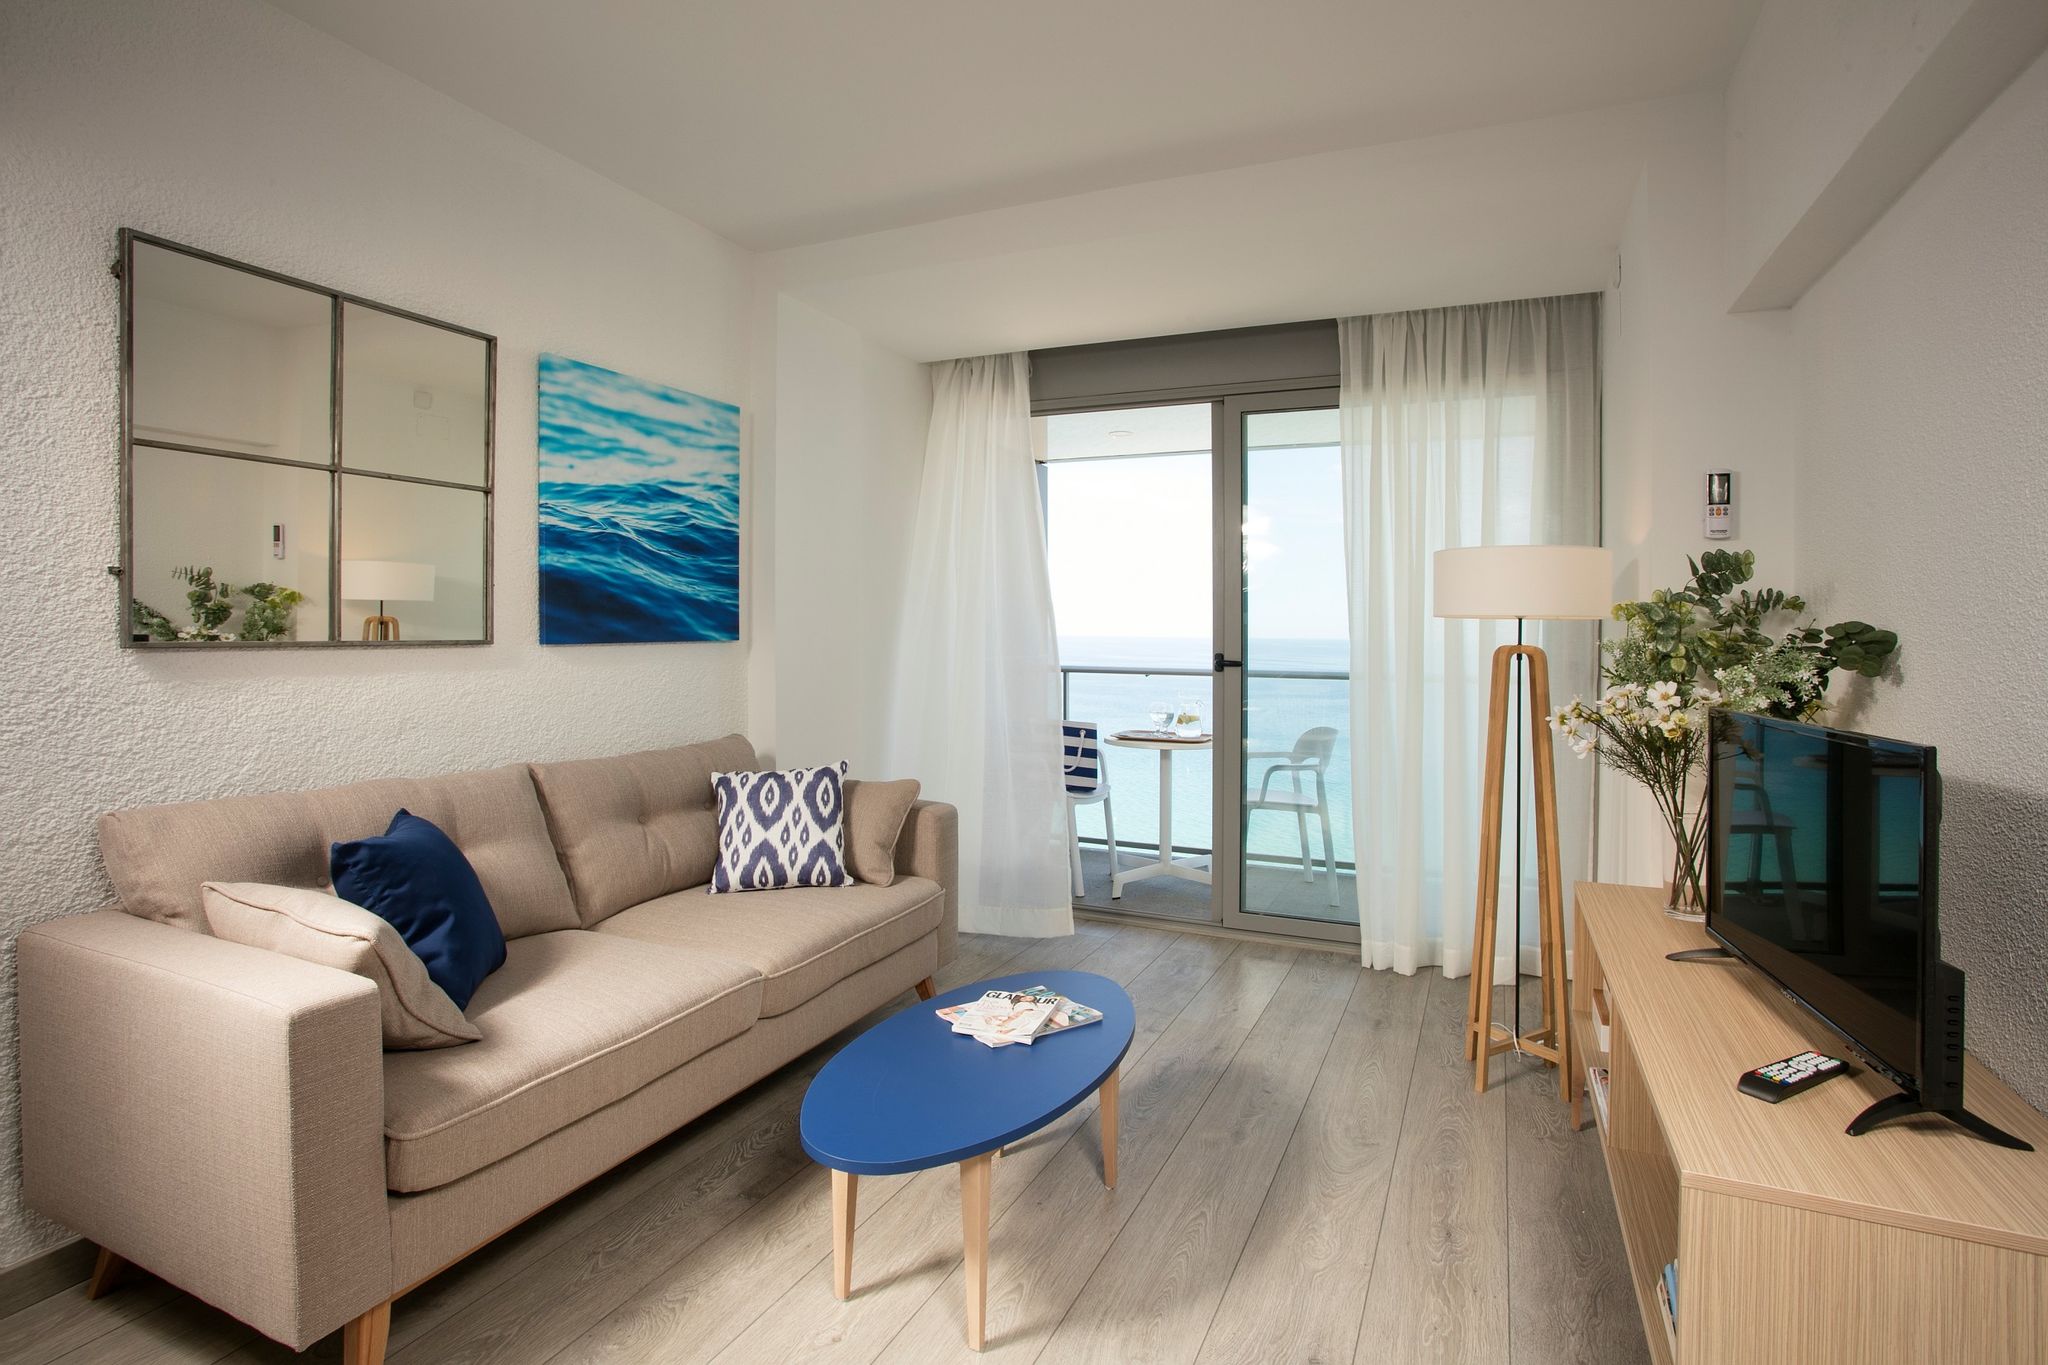 Well-furnished apartment with airconditioning in Blanes